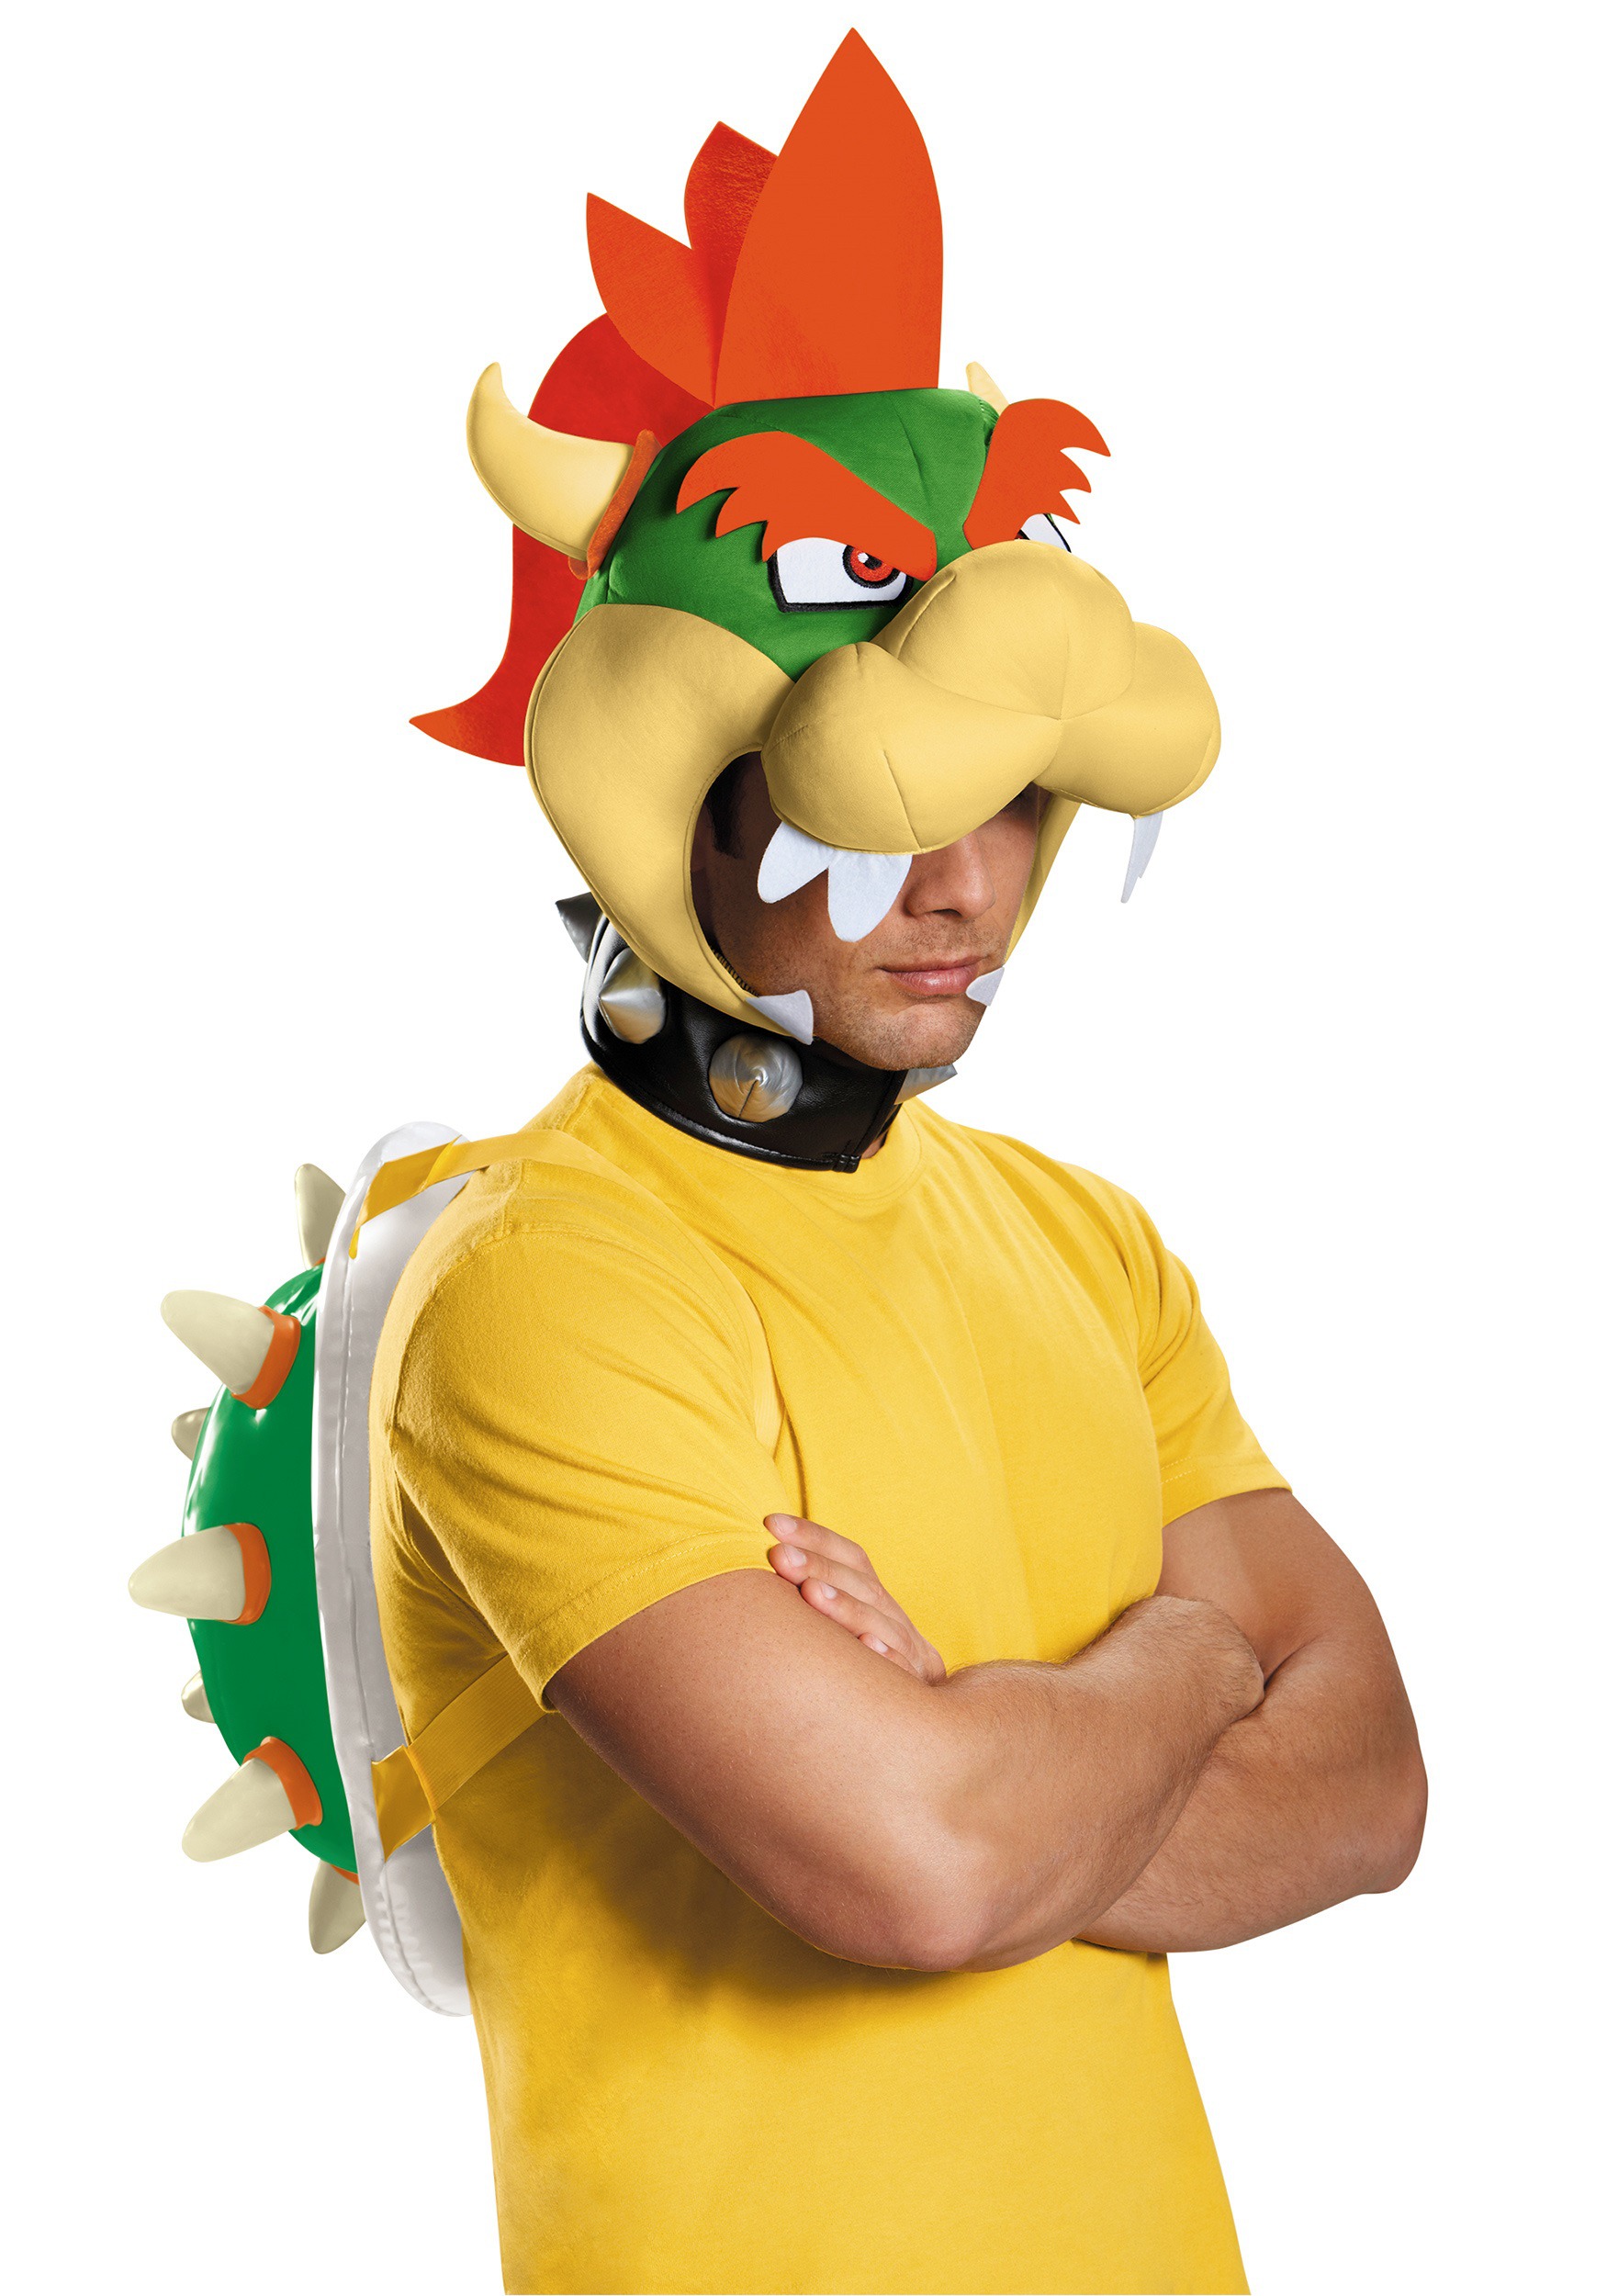 Bowser Costume  Bowser costume, Cool halloween costumes, Bowser